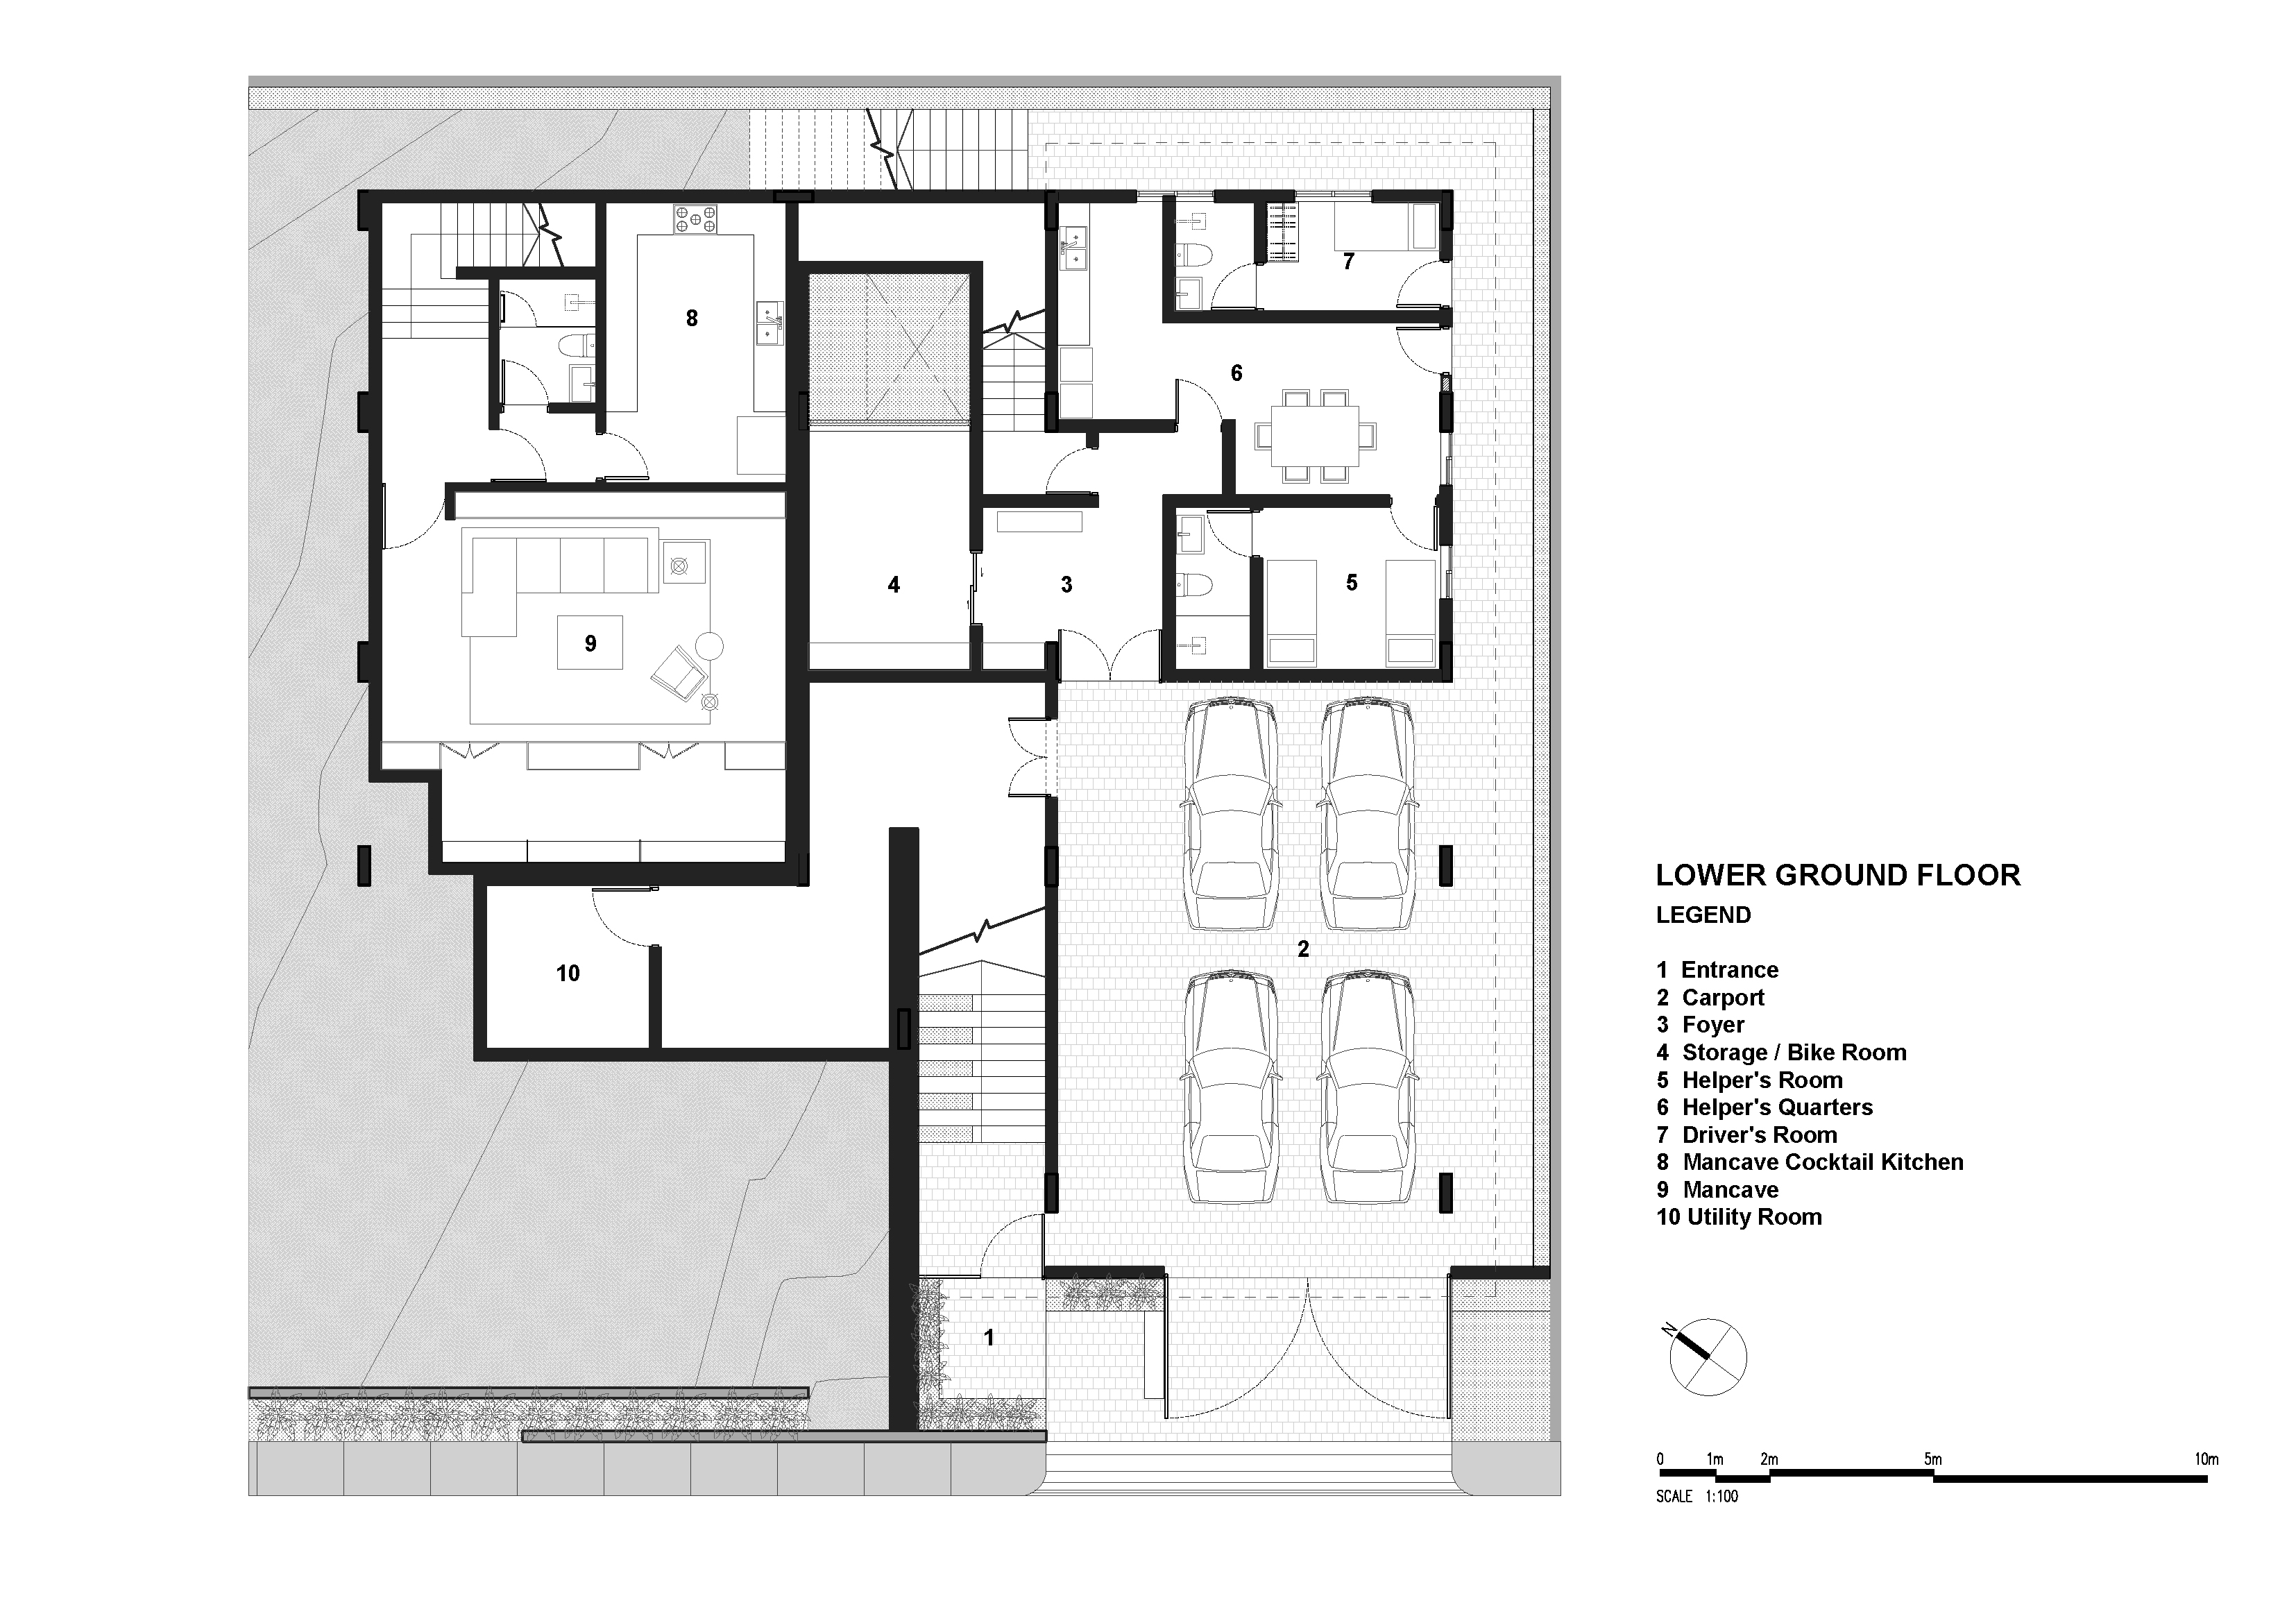 Lower Ground Floor Plan Screen House, Source by PXP Design Workshop